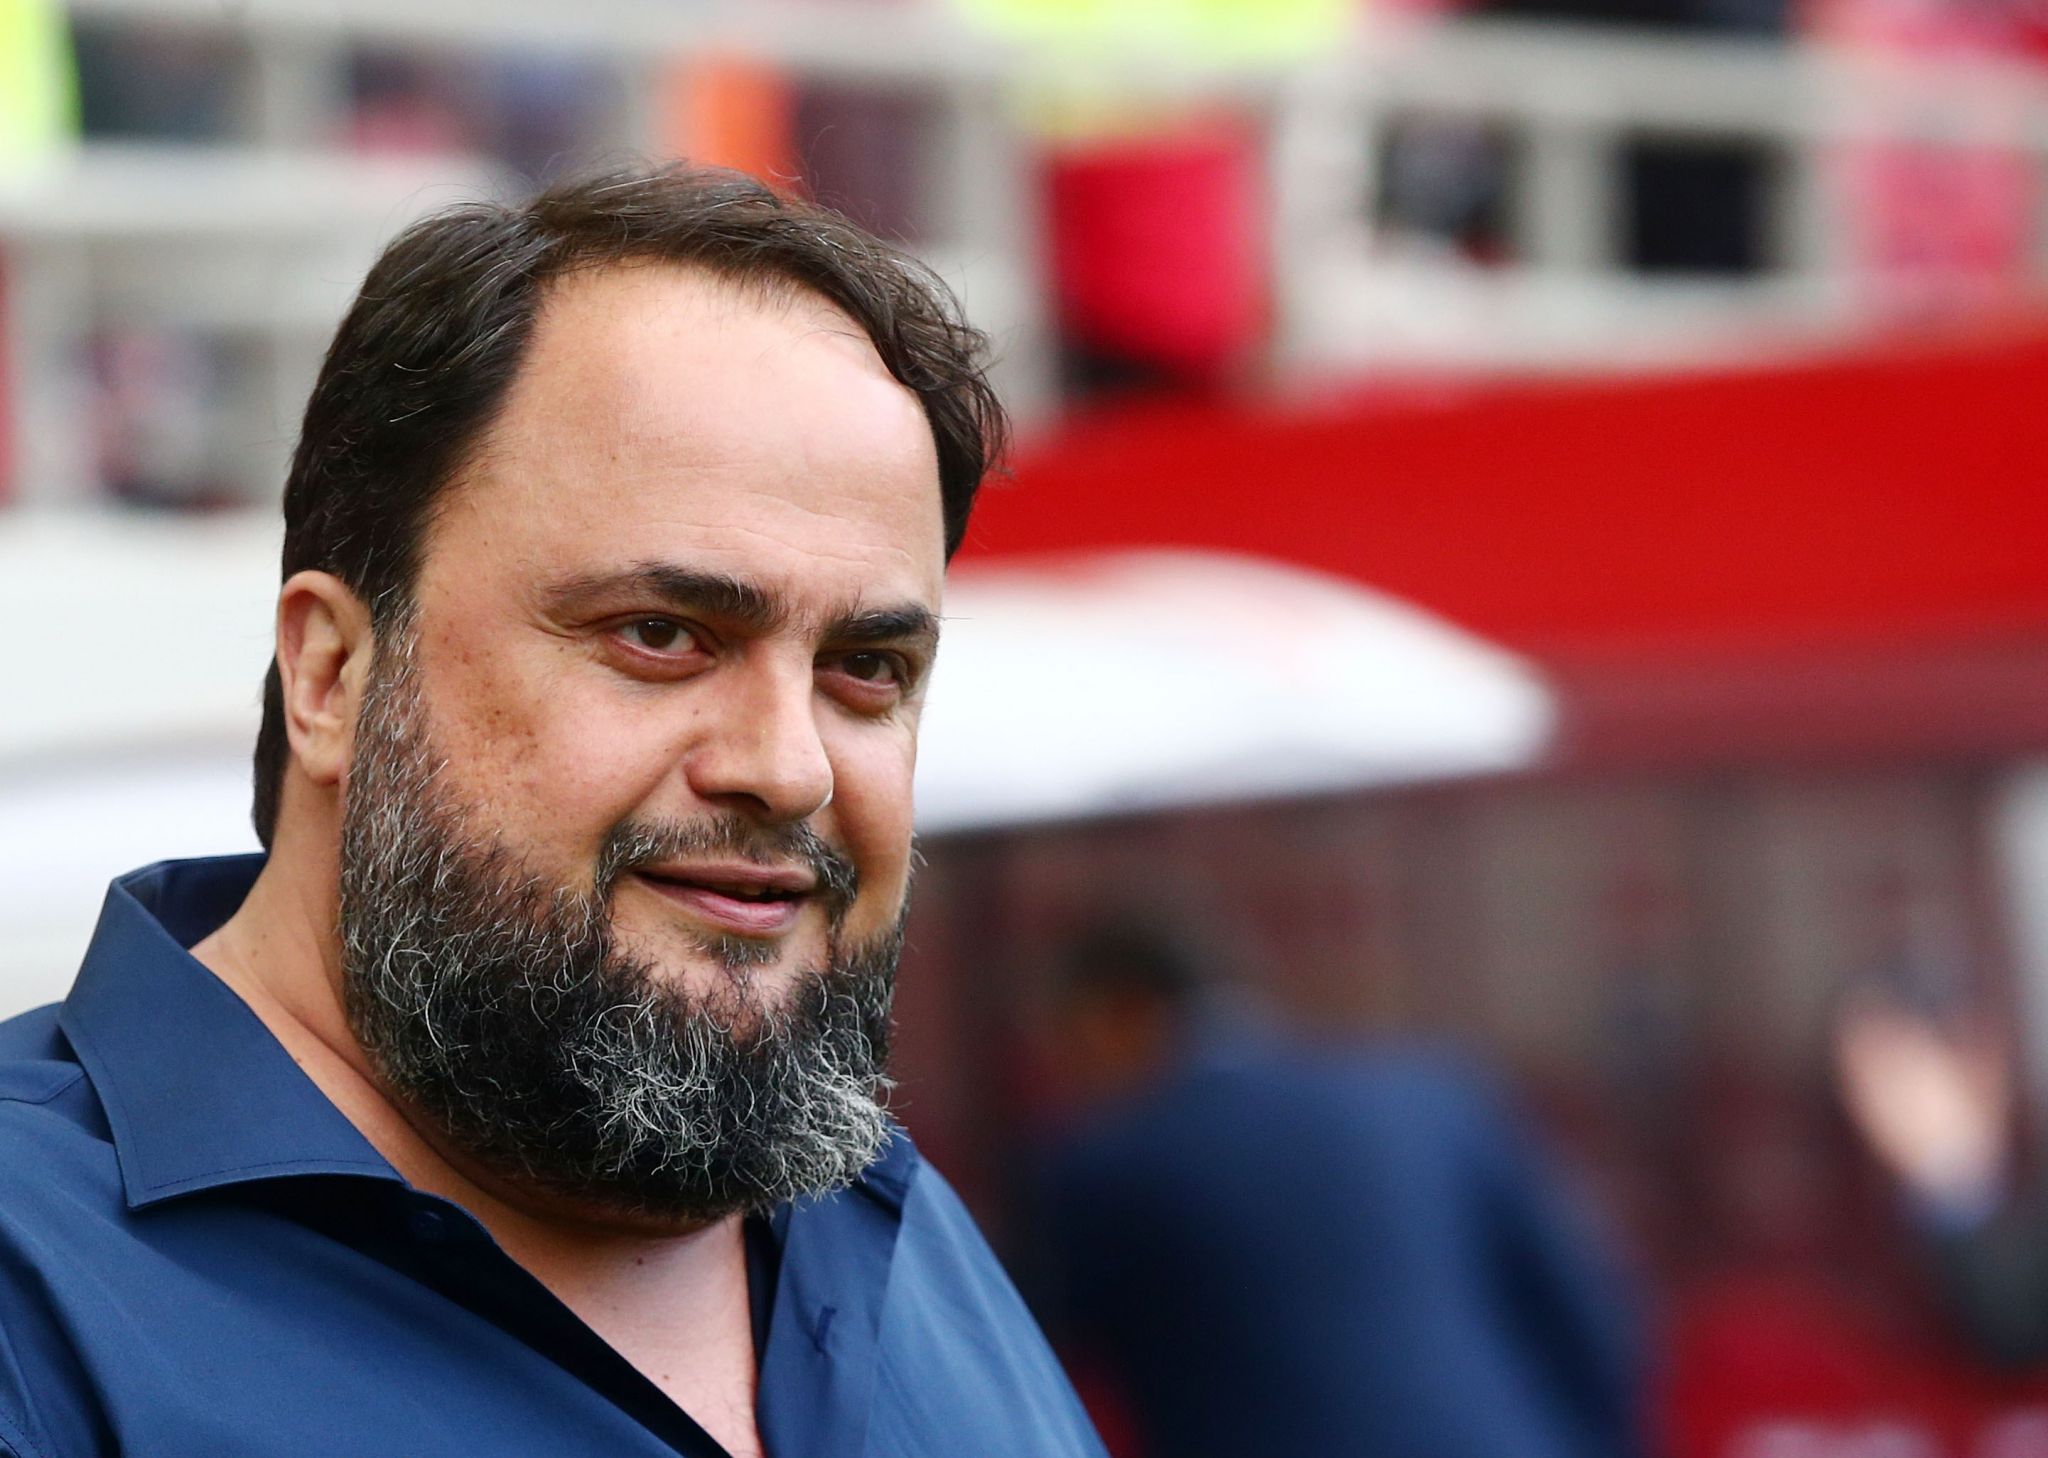 Evangelos Marinakis: “Let us shed light in the lives of those in need”